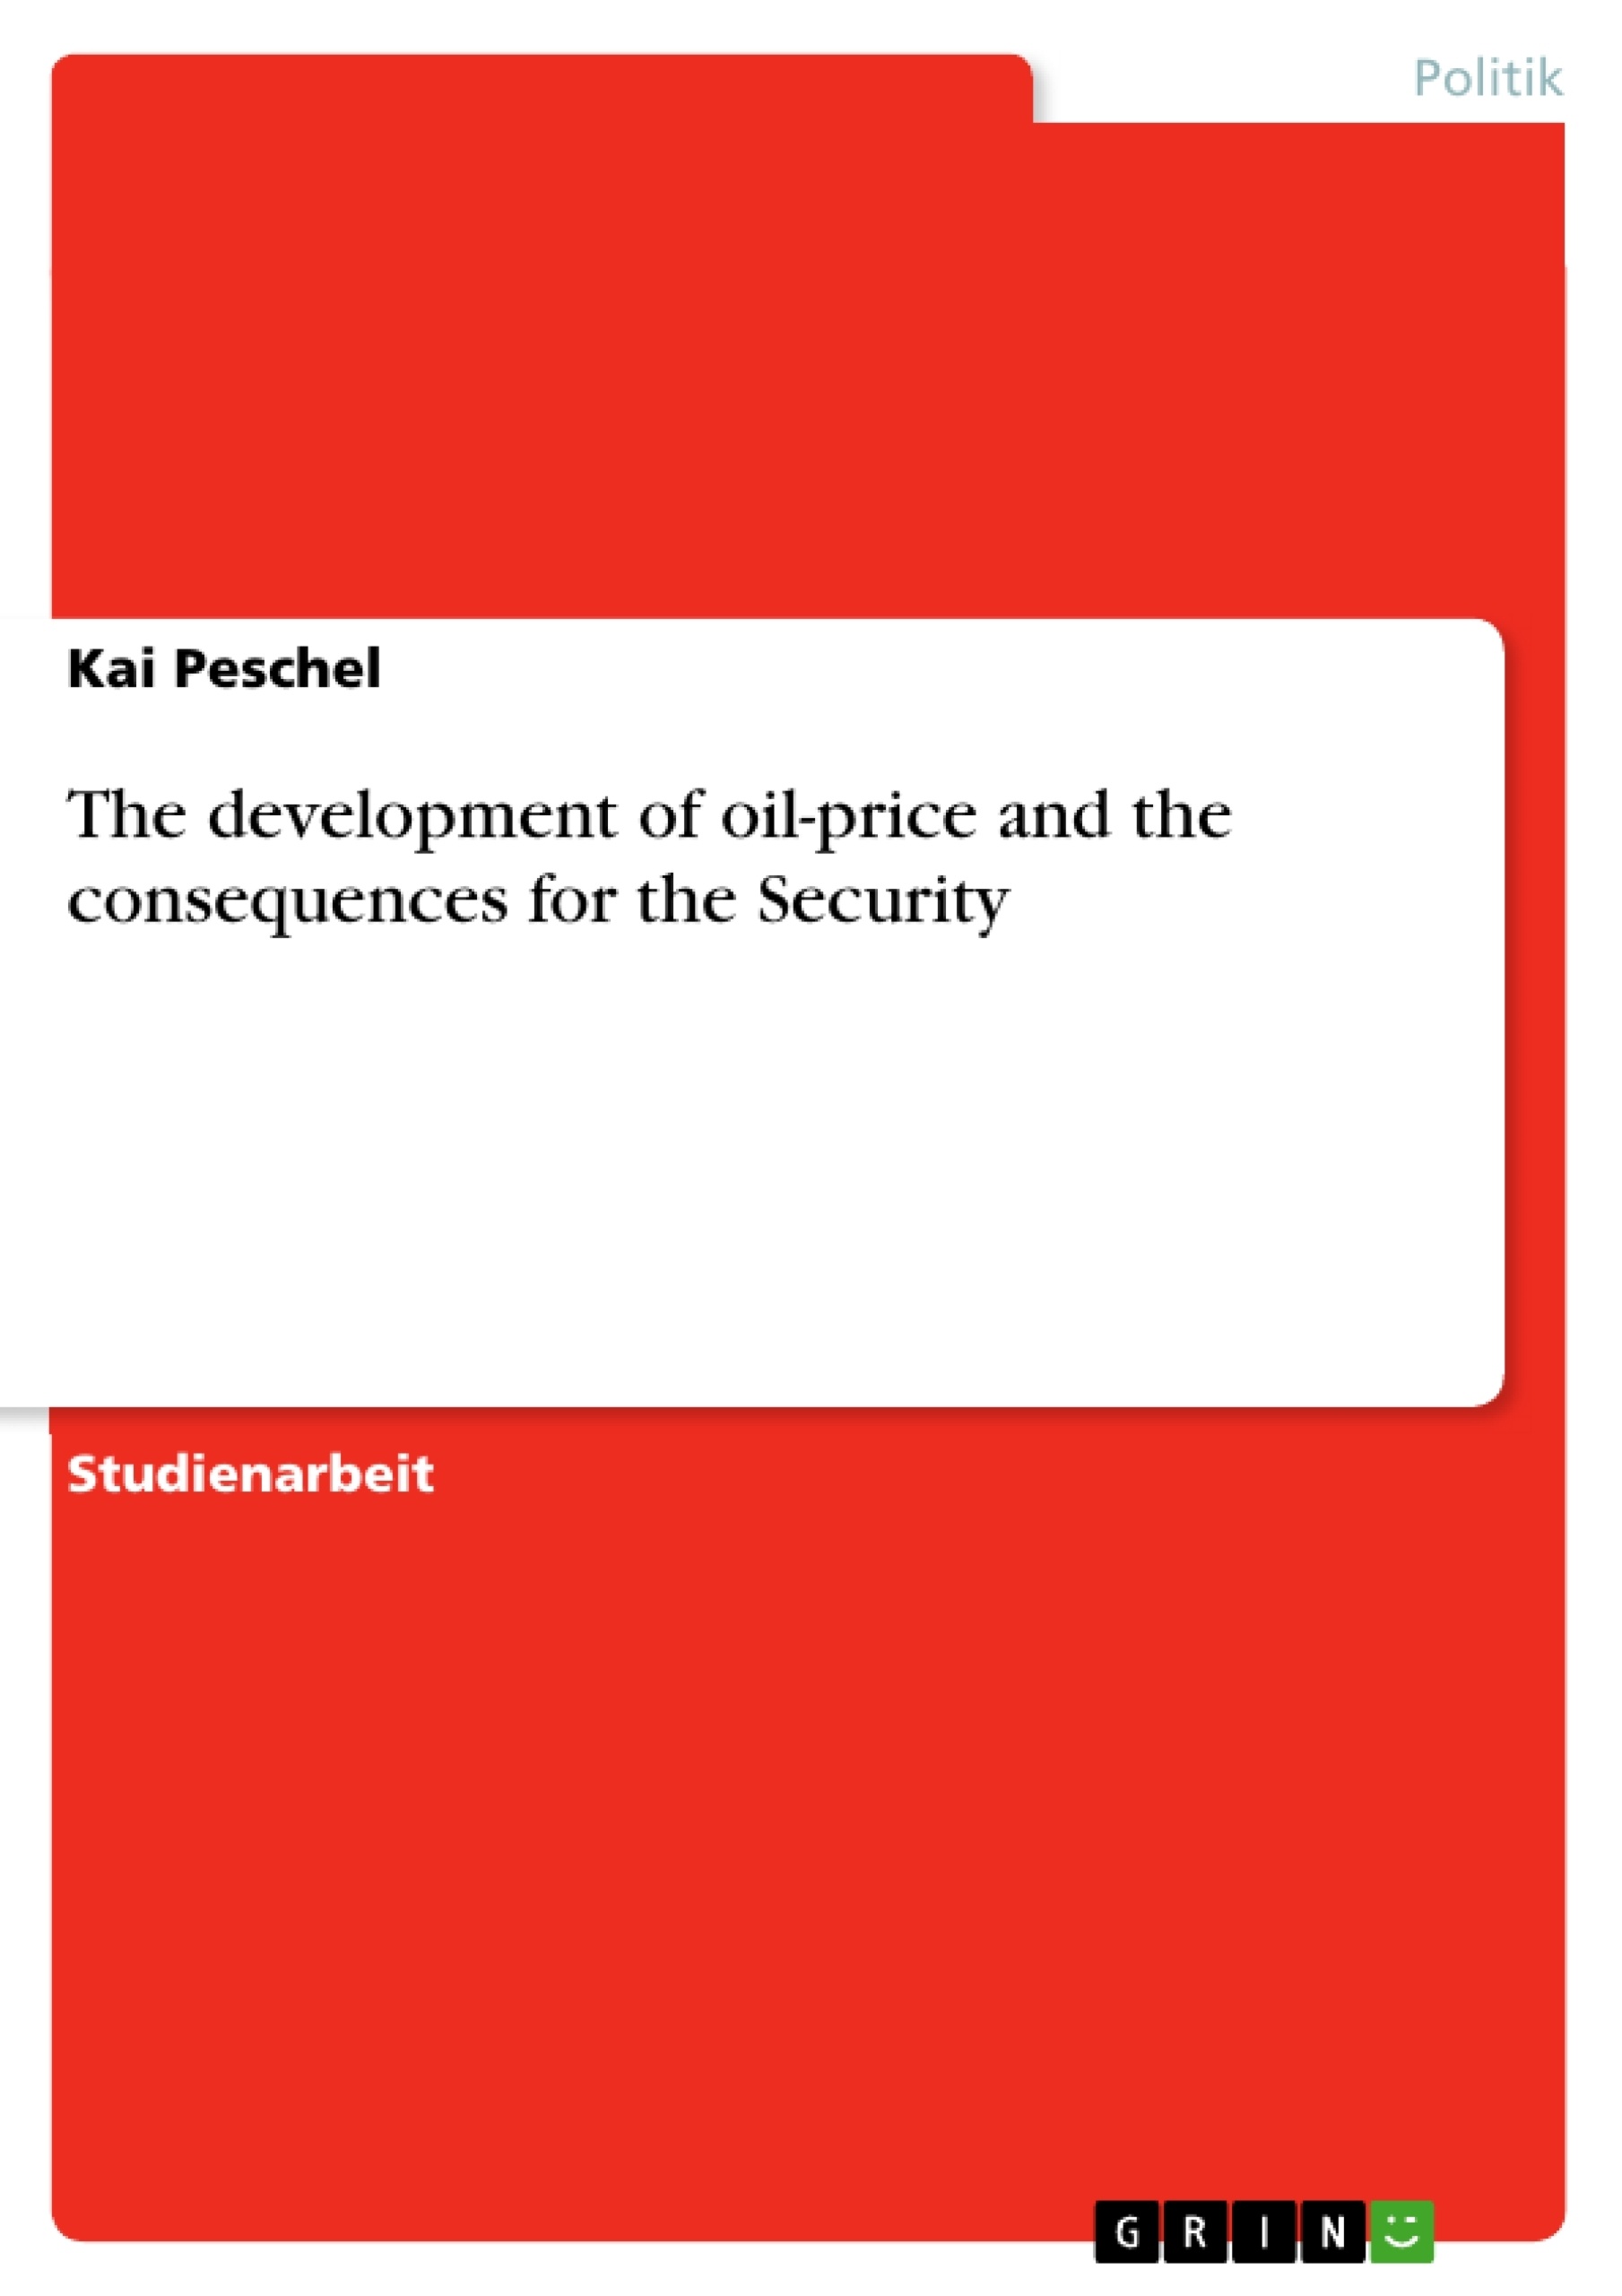 Titel: The development of oil-price and the consequences for the Security